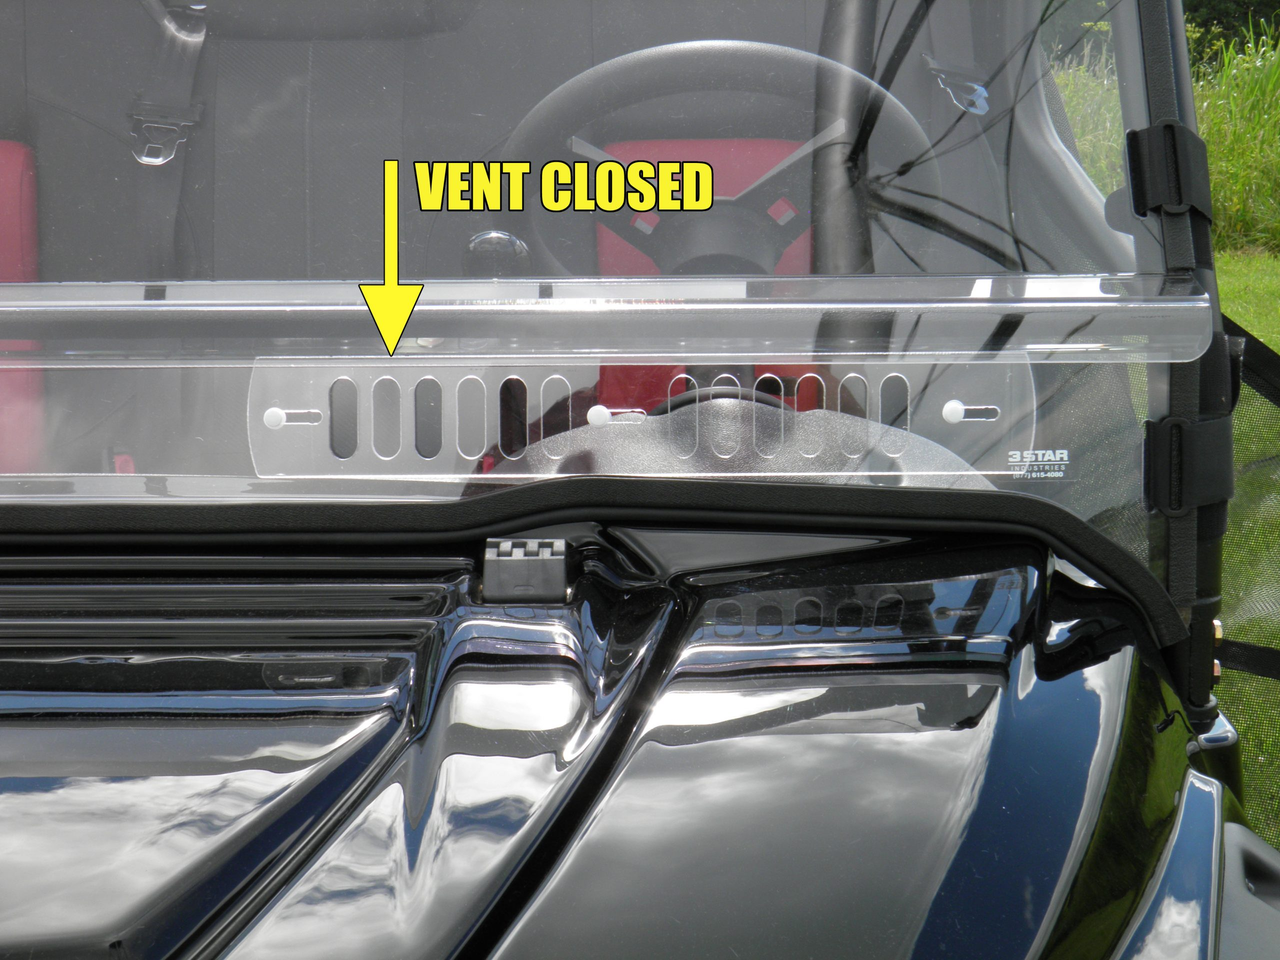 3 Star side x side can-am commander windshield vents closed